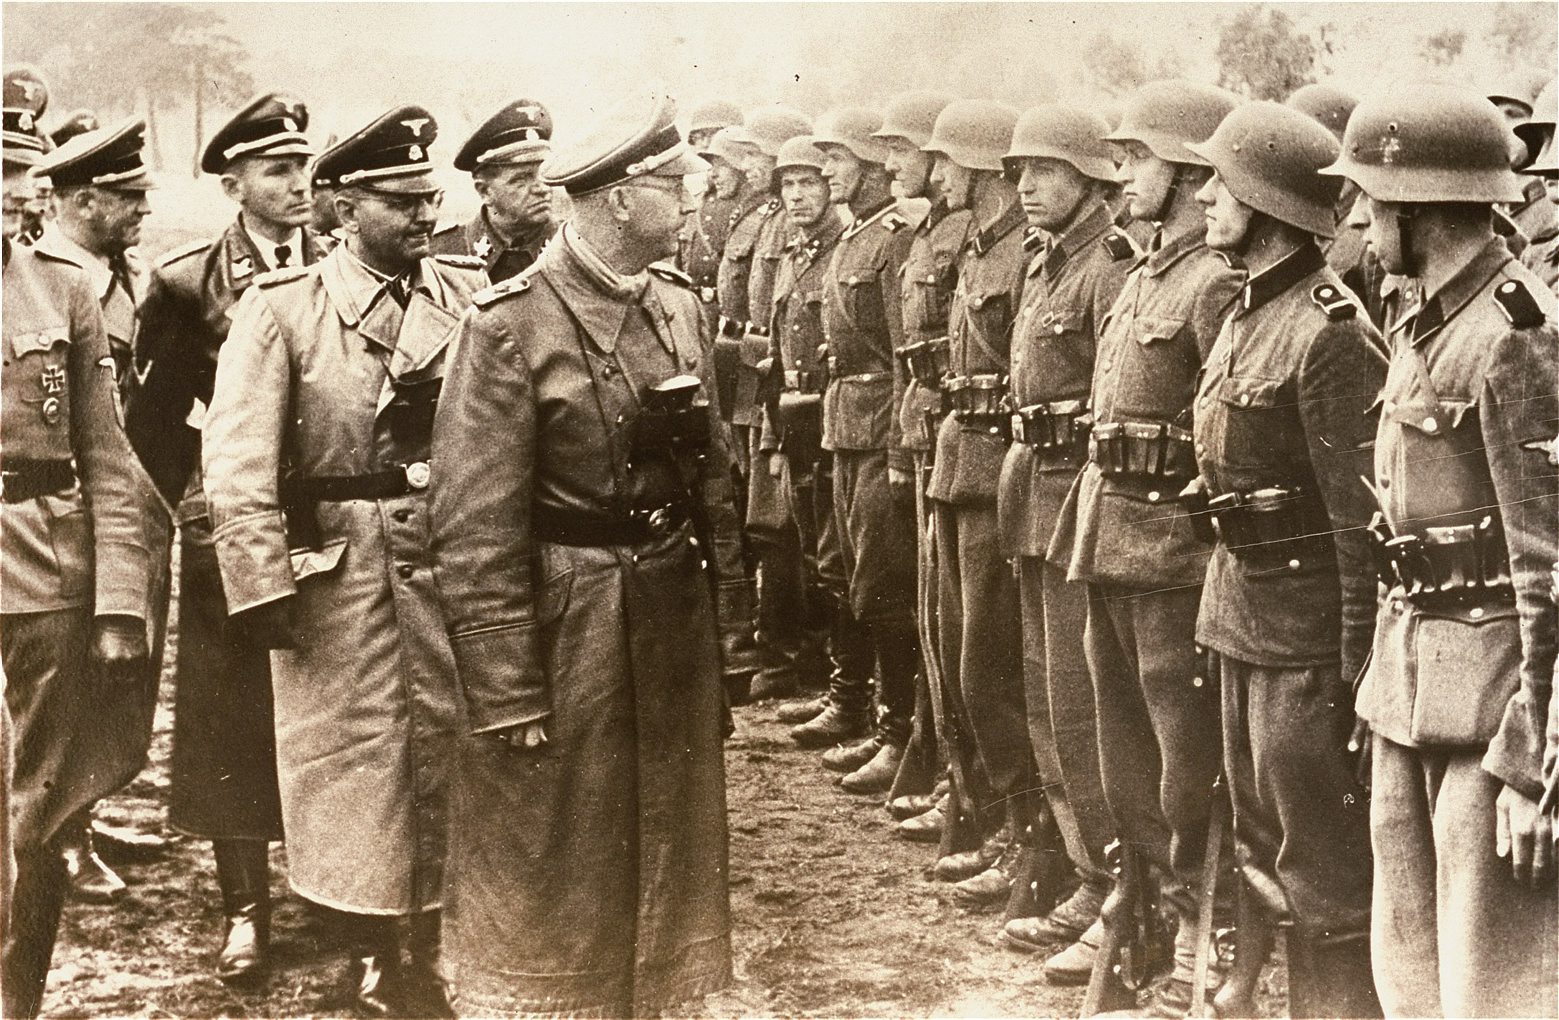 The June 3, 1944 photo provided by the US Holocaust Memorial Museum shows Heinrich Himmler, centre,  SS Reichsfuehrer-SS, head of the Gestapo and the Waffen-SS, and Minister of the Interior of Nazi Germany from 1943 to 1945, as he reviews troops of the Galician SS-Volunteer Infantry Division   Michael Karkoc  a top commander whose Nazi SS-led unit is blamed for burning villages filled with women and children lied to American immigration officials to get into the United States and has been living in Minnesota since shortly after World War II, according to evidence uncovered by The Associated Press. Michael Karkoc became a member of the Galician division after the Ukrainian Self Defense Legion was incorporated into it near the end of the war. (AP photo/ U.S. Holocaust Memorial Museum, courtesy of Atlantic Foto Verlag Berlin) Germany US Nazi Commander